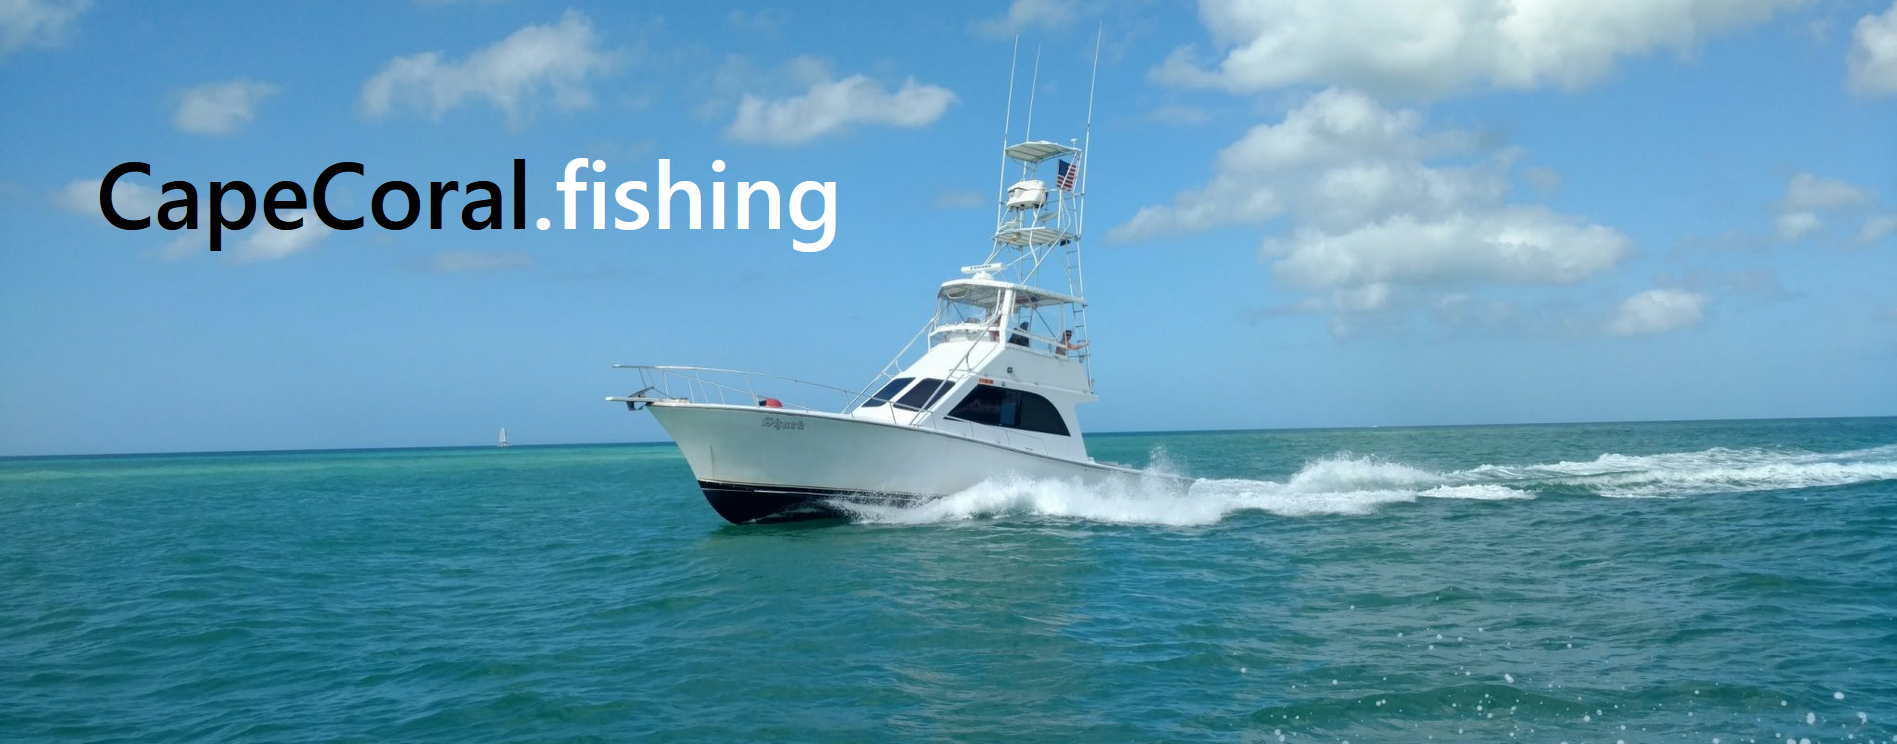 Cape Coral Fishing Charter hero image